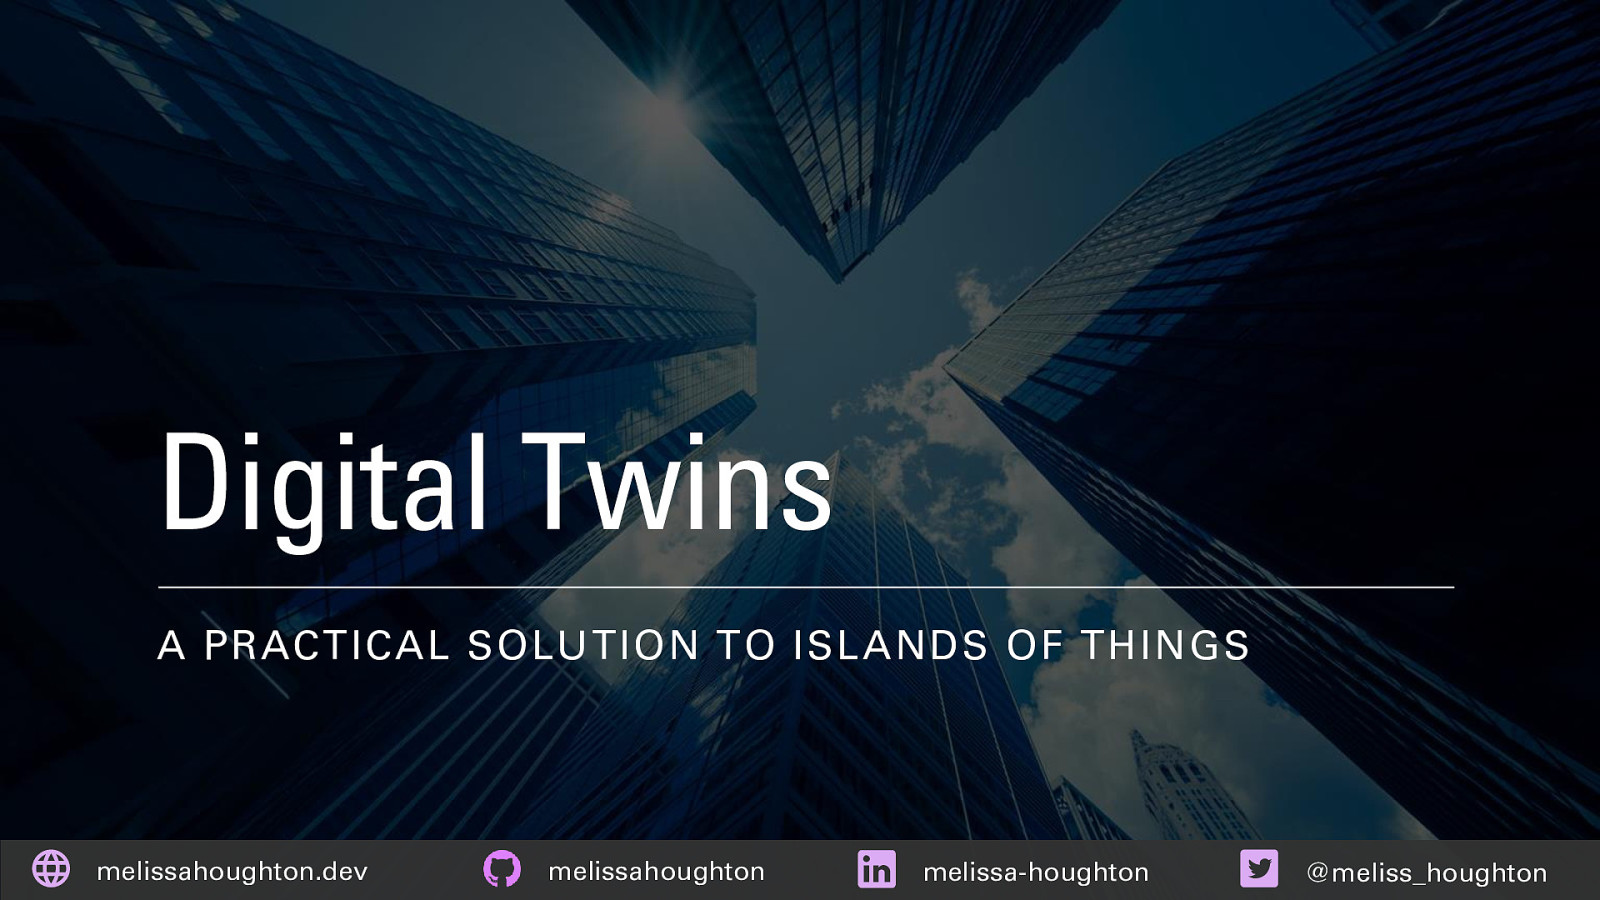 Digital Twins A PRACTICAL SOLUTION TO ISLANDS OF THINGS